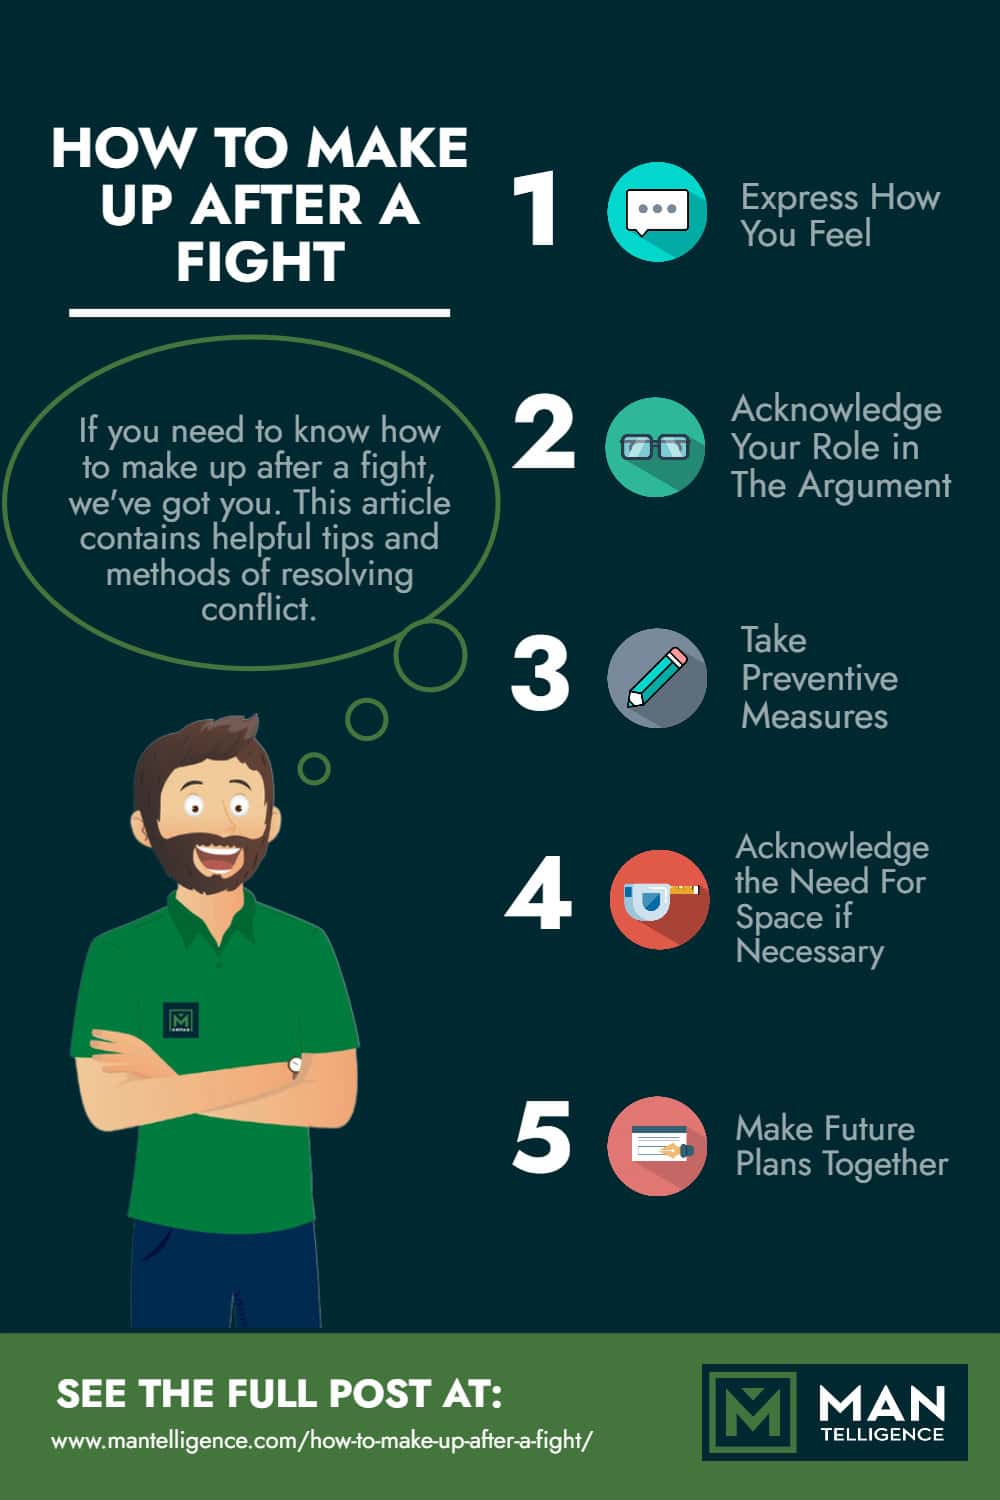 How to Make Up After a Fight - Infographic